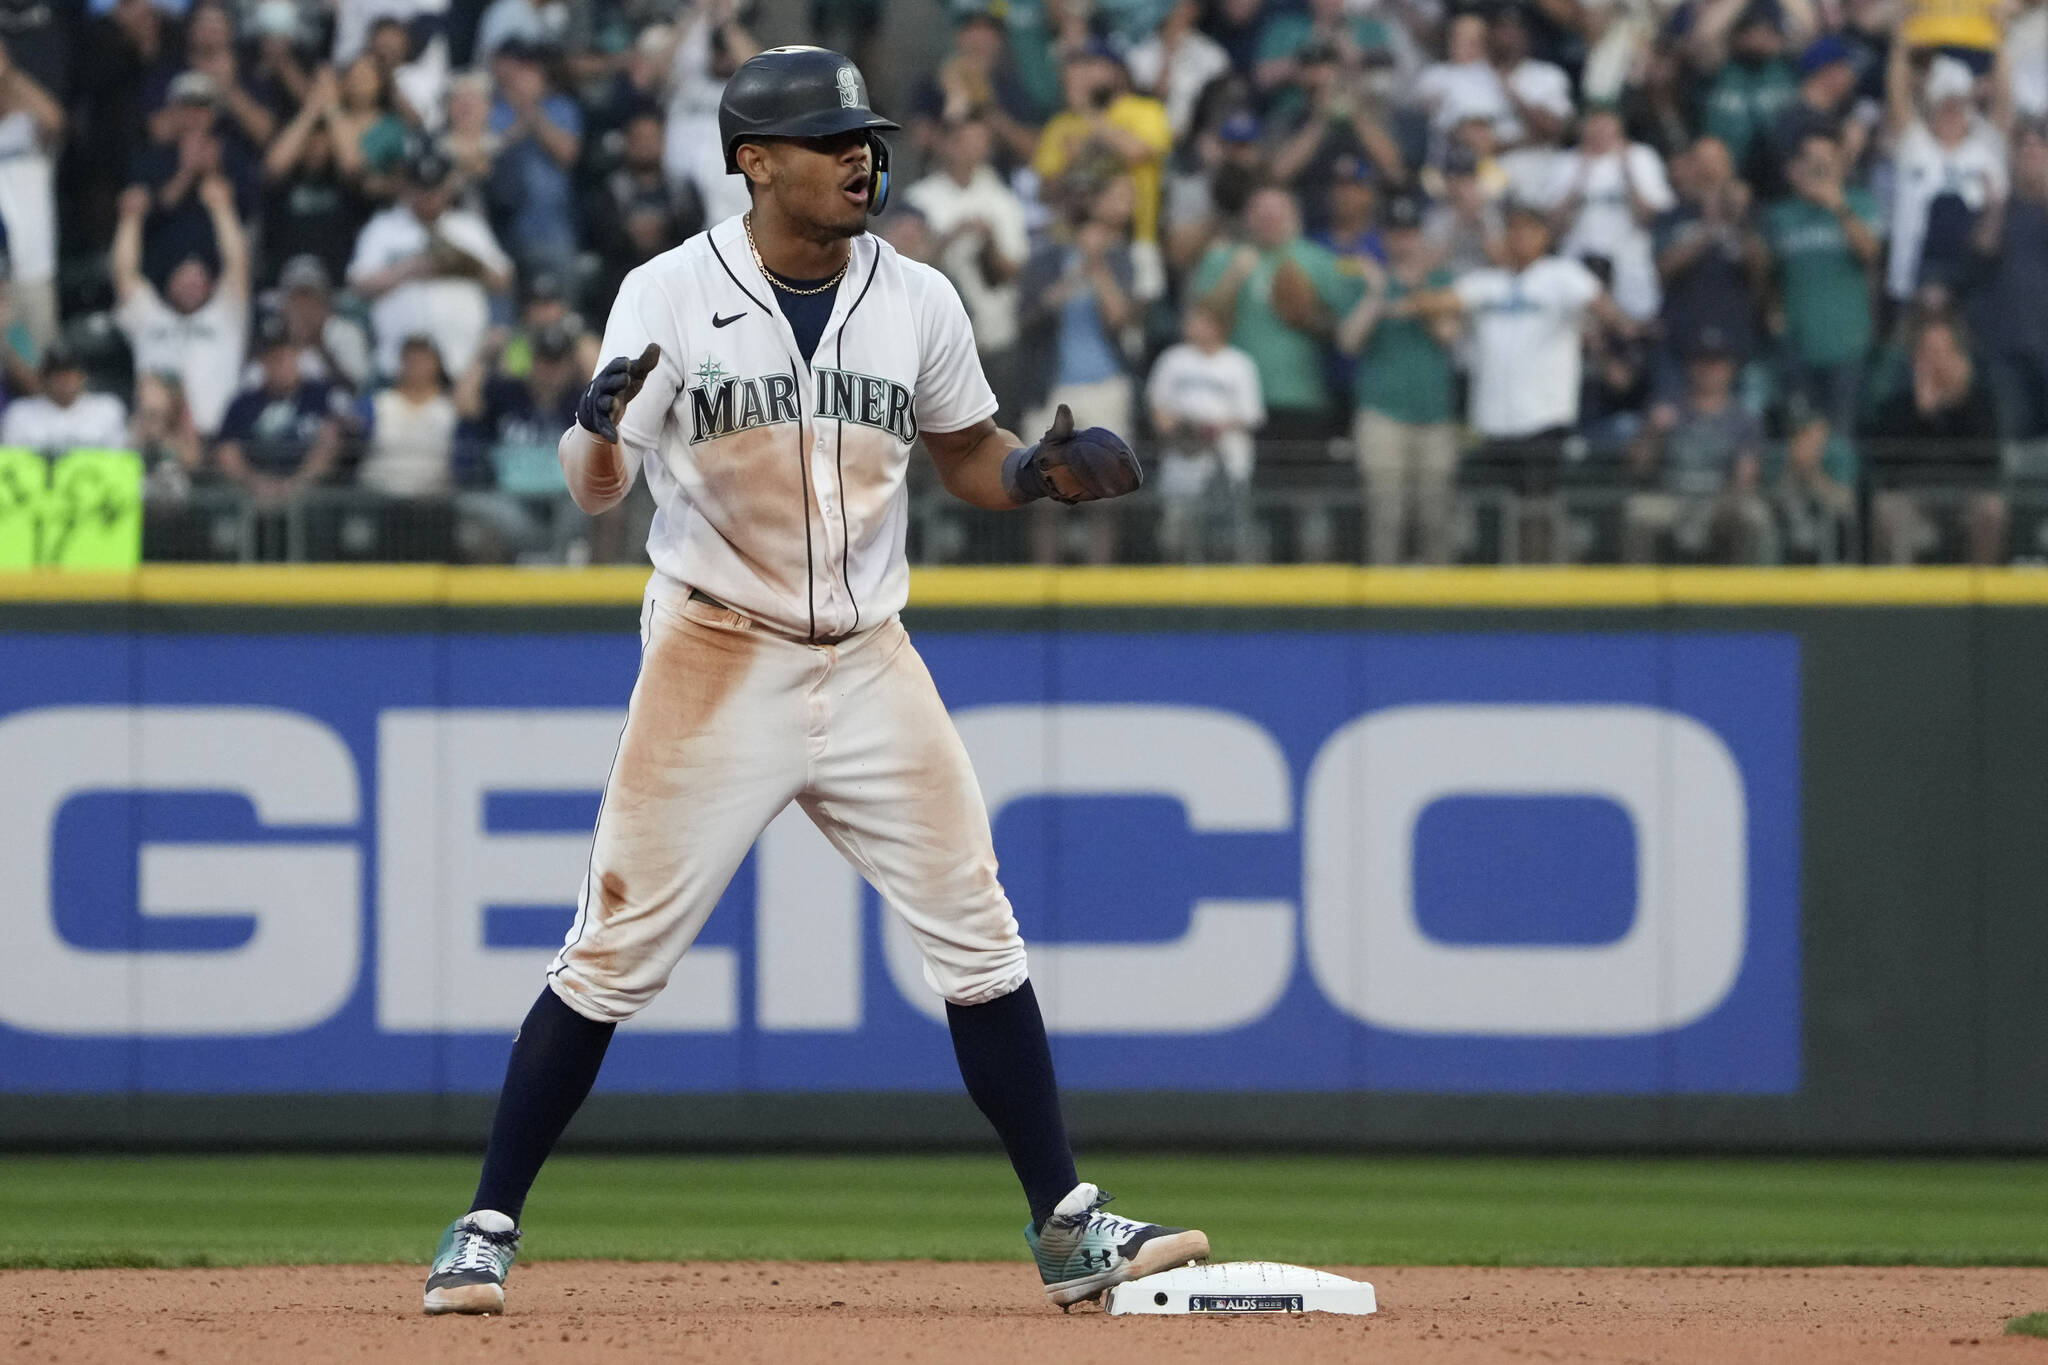 Seattle Mariners’s Julio Rodriguez reacts after stealing second base during the 13th inning in Game 3 of an American League Division Series baseball game against the Houston Astros, Saturday, Oct. 15, 2022, in Seattle. (AP Photo/Ted S. Warren)